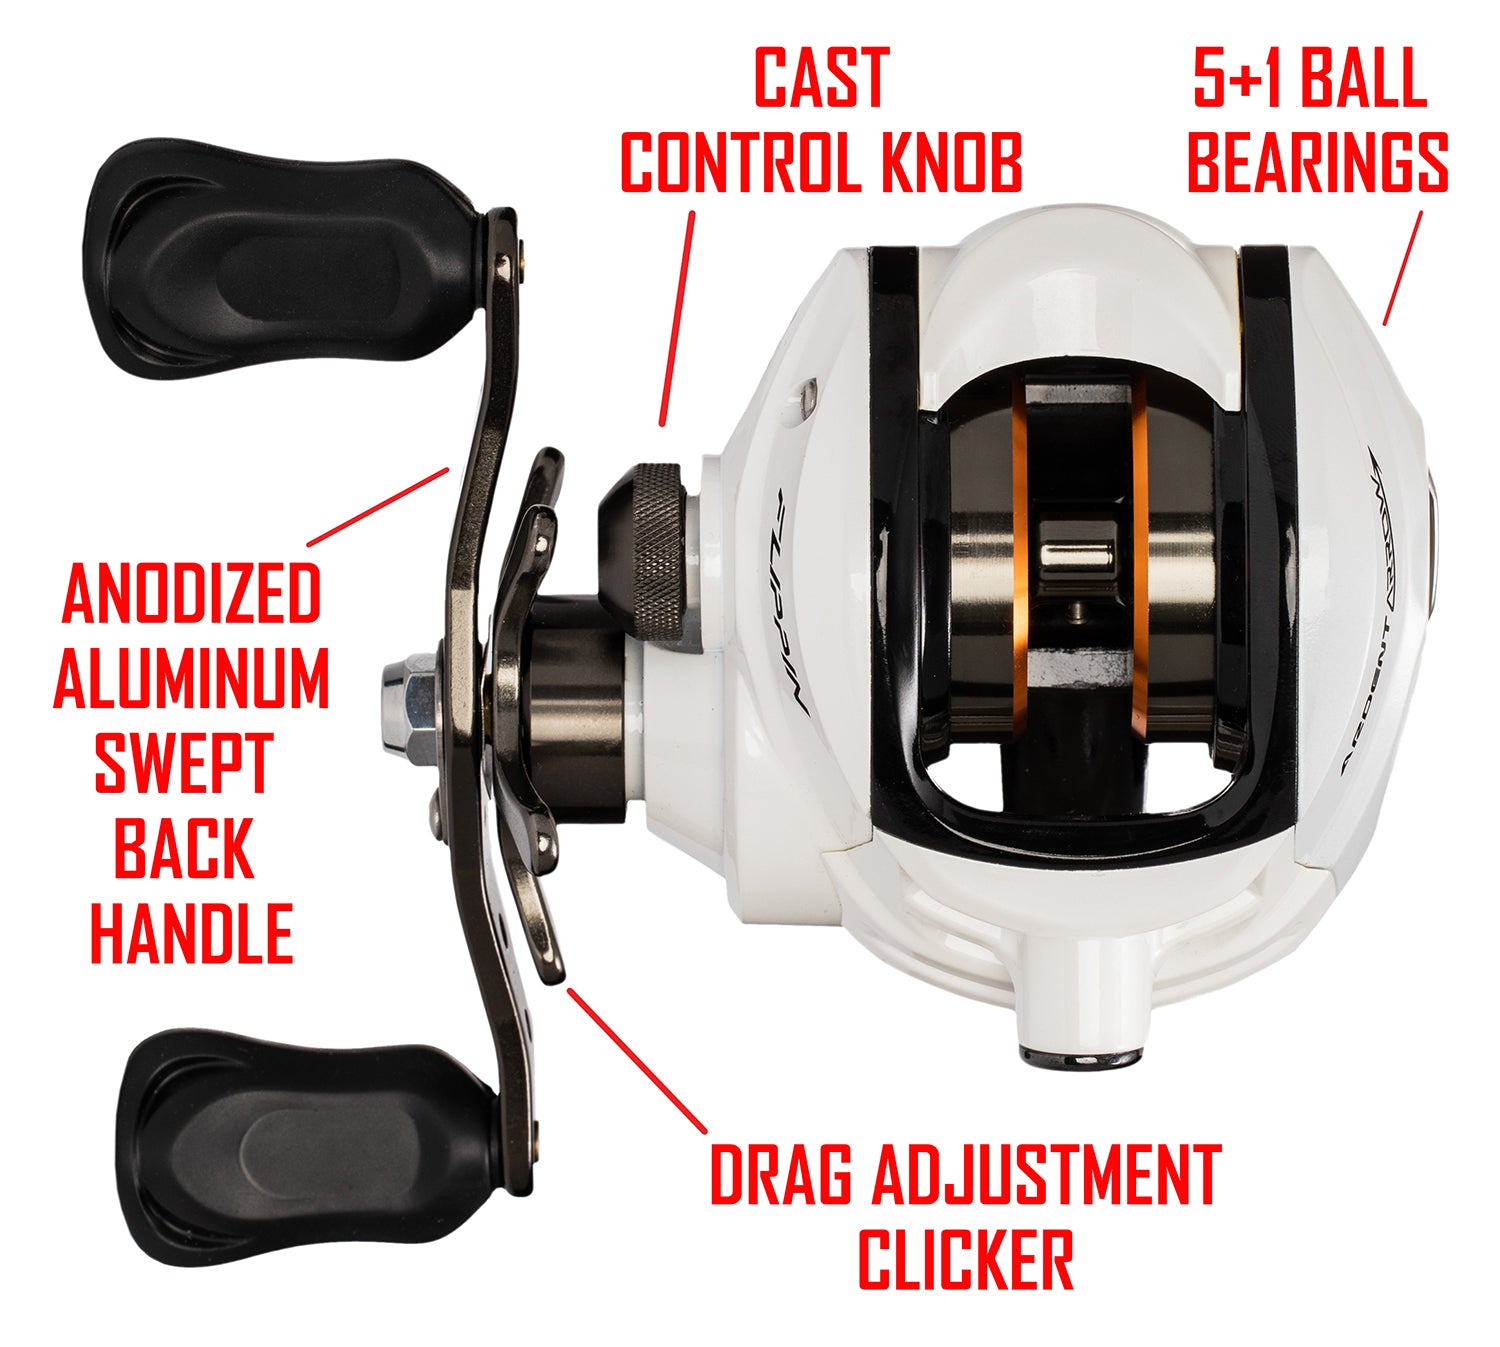 White and black ARROW FLIPPING REEL - 7.0:1 RH with red text. text: CAST CONTROL KNOB 5+1 BALL BEARINGS ANODIZED ALUMINUM SWEPT BACK HANDLE DRAG ADJUSTMENT CLICKER